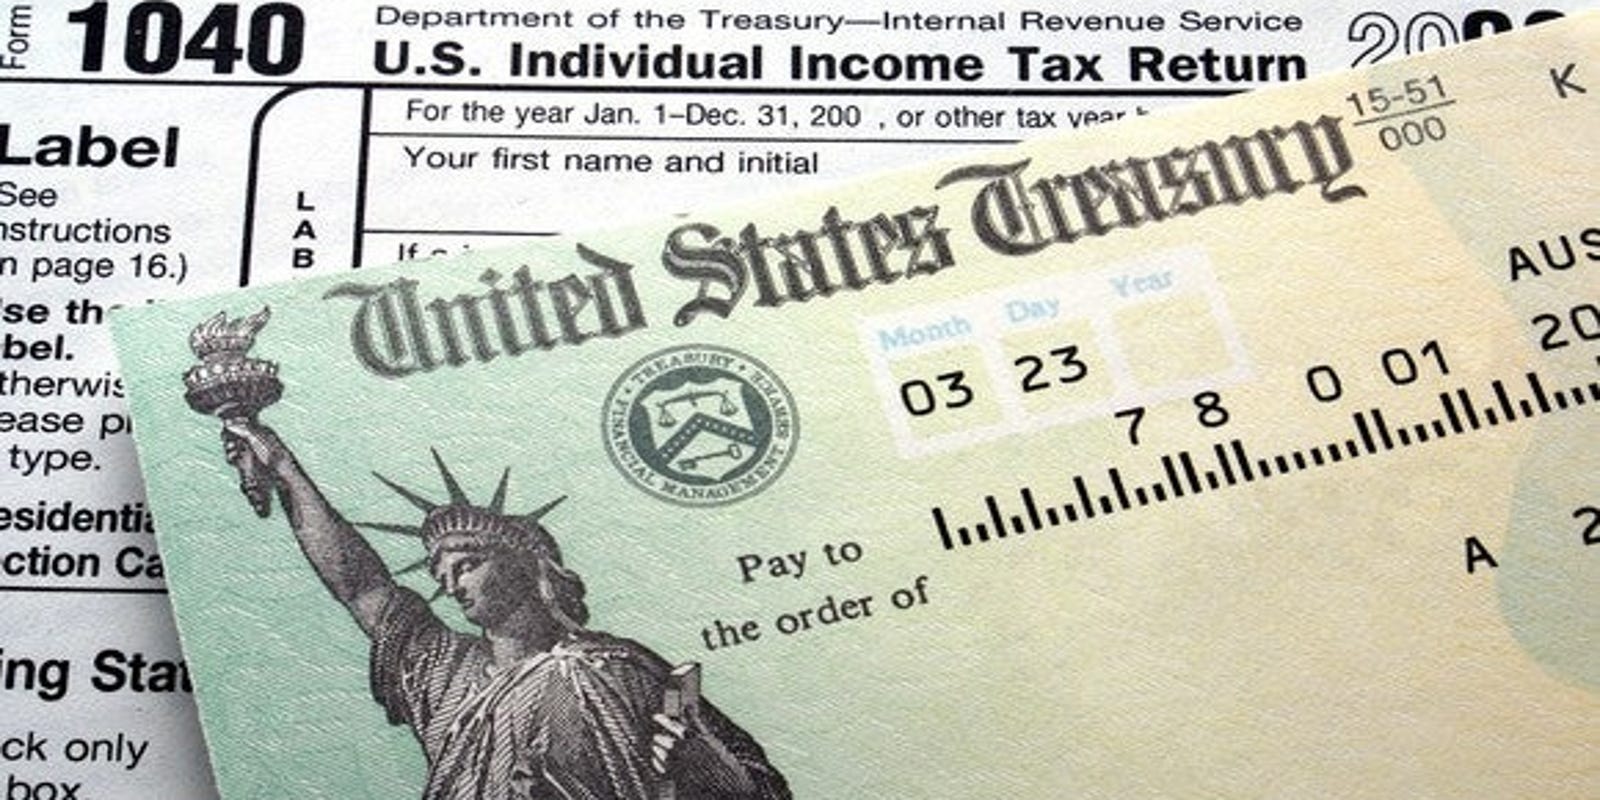 stimulus-checks-irs-unveils-new-website-to-sign-up-for-payments